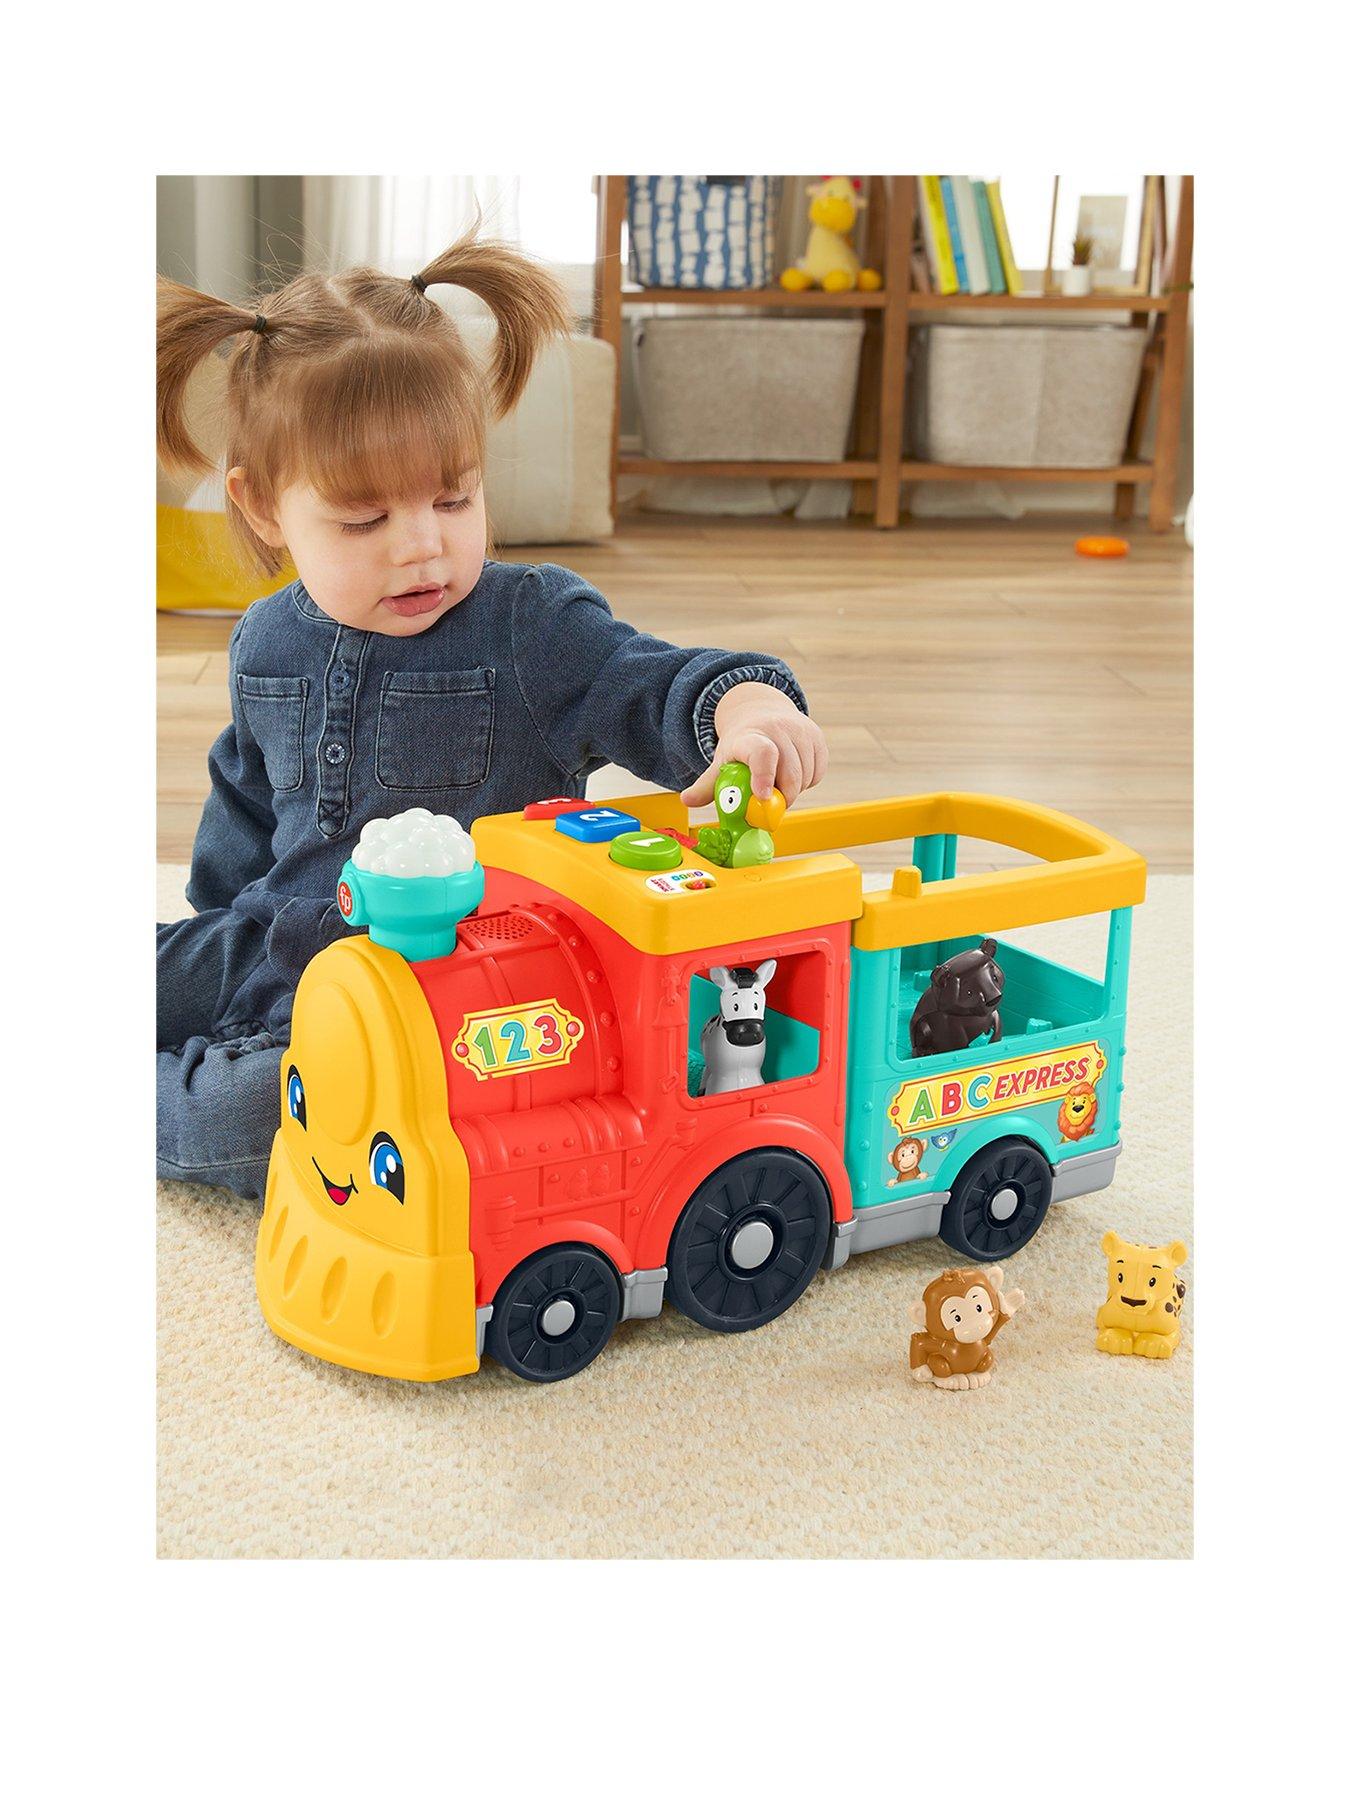 Months Details about   Fun Time Push Along Pre-School Tool Truck   18 